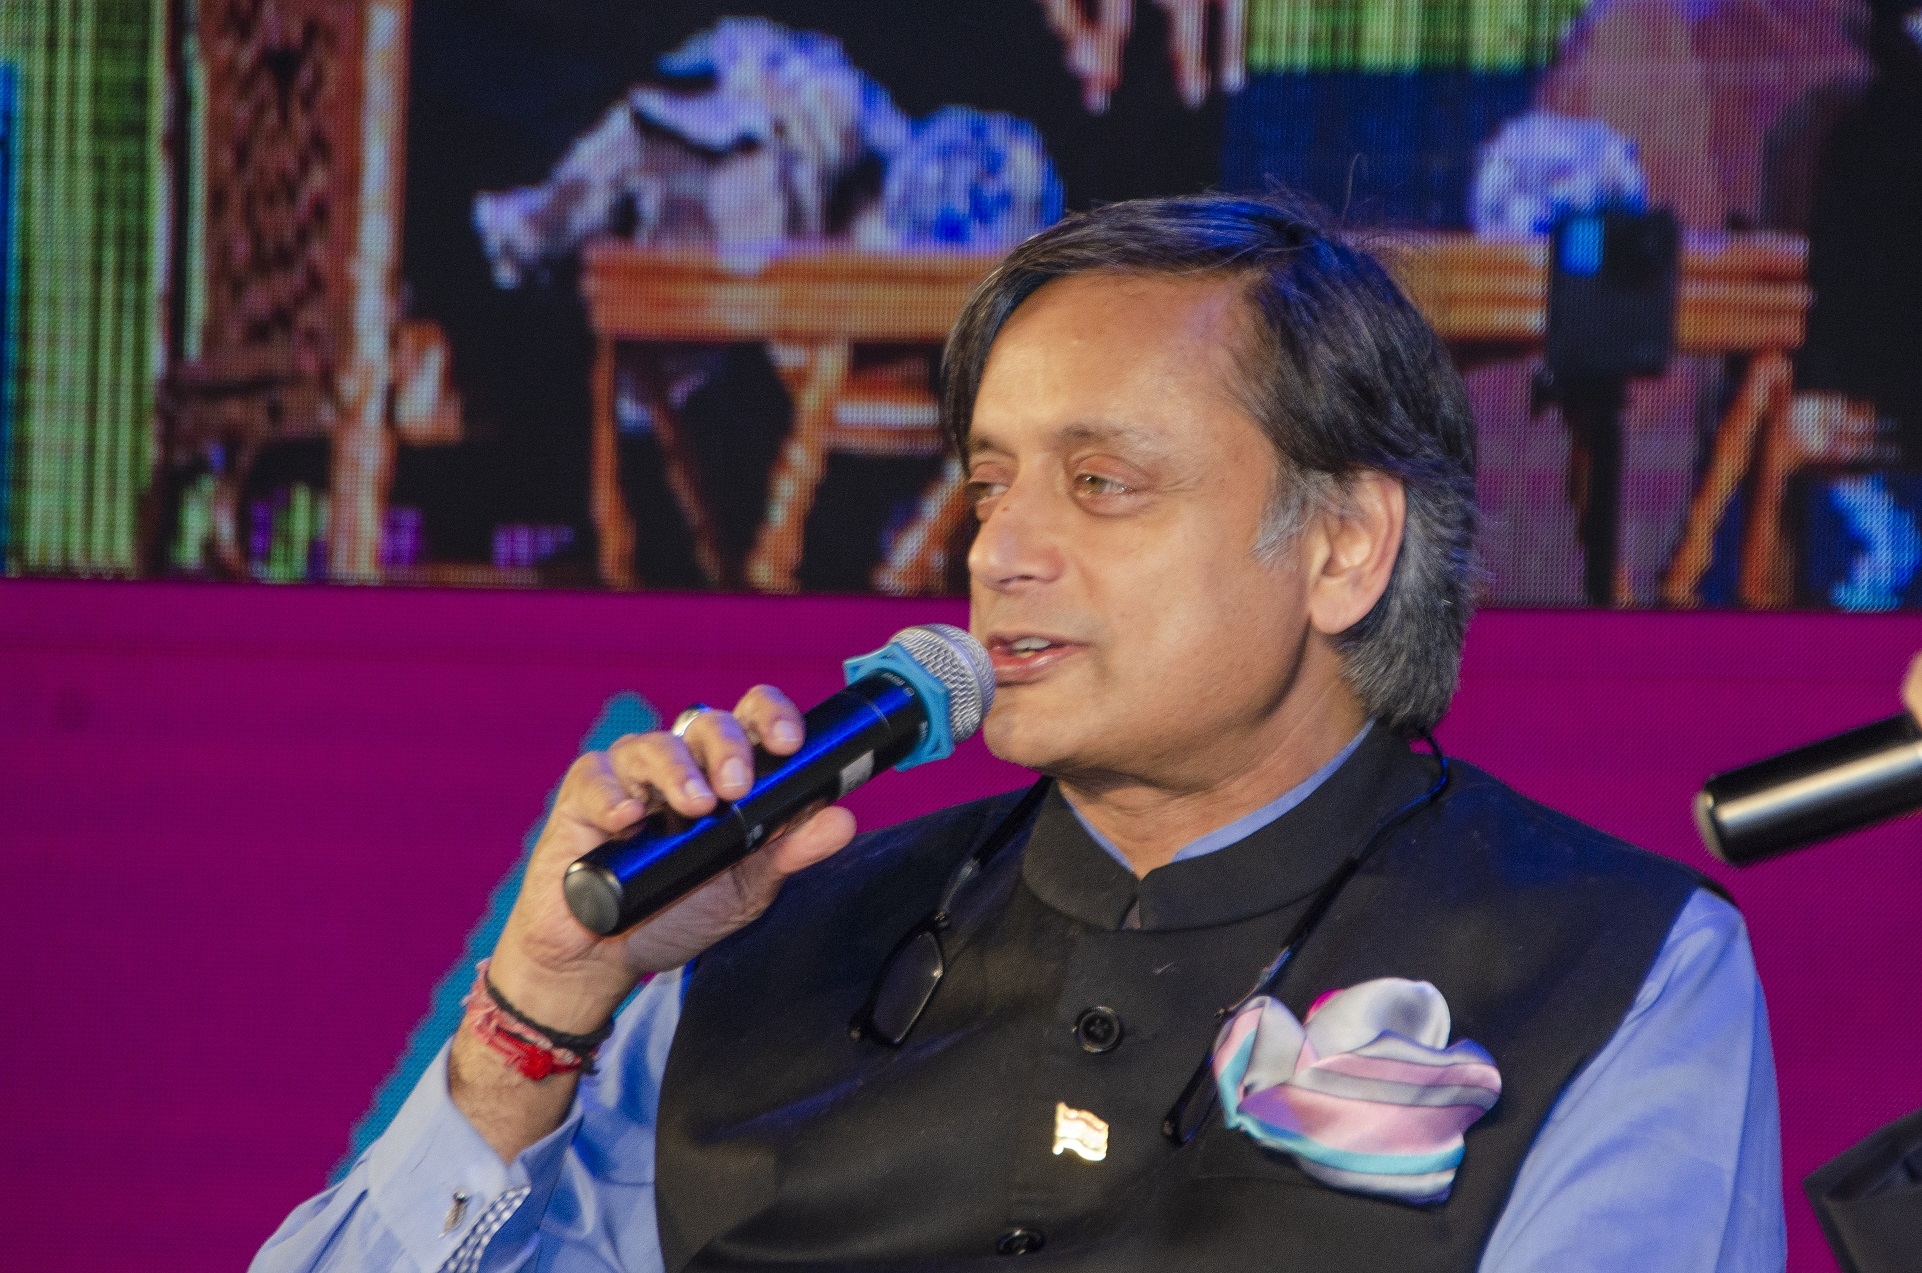 Shashi Tharoor dares PM Modi to contest from south India like Rahul Gandhi